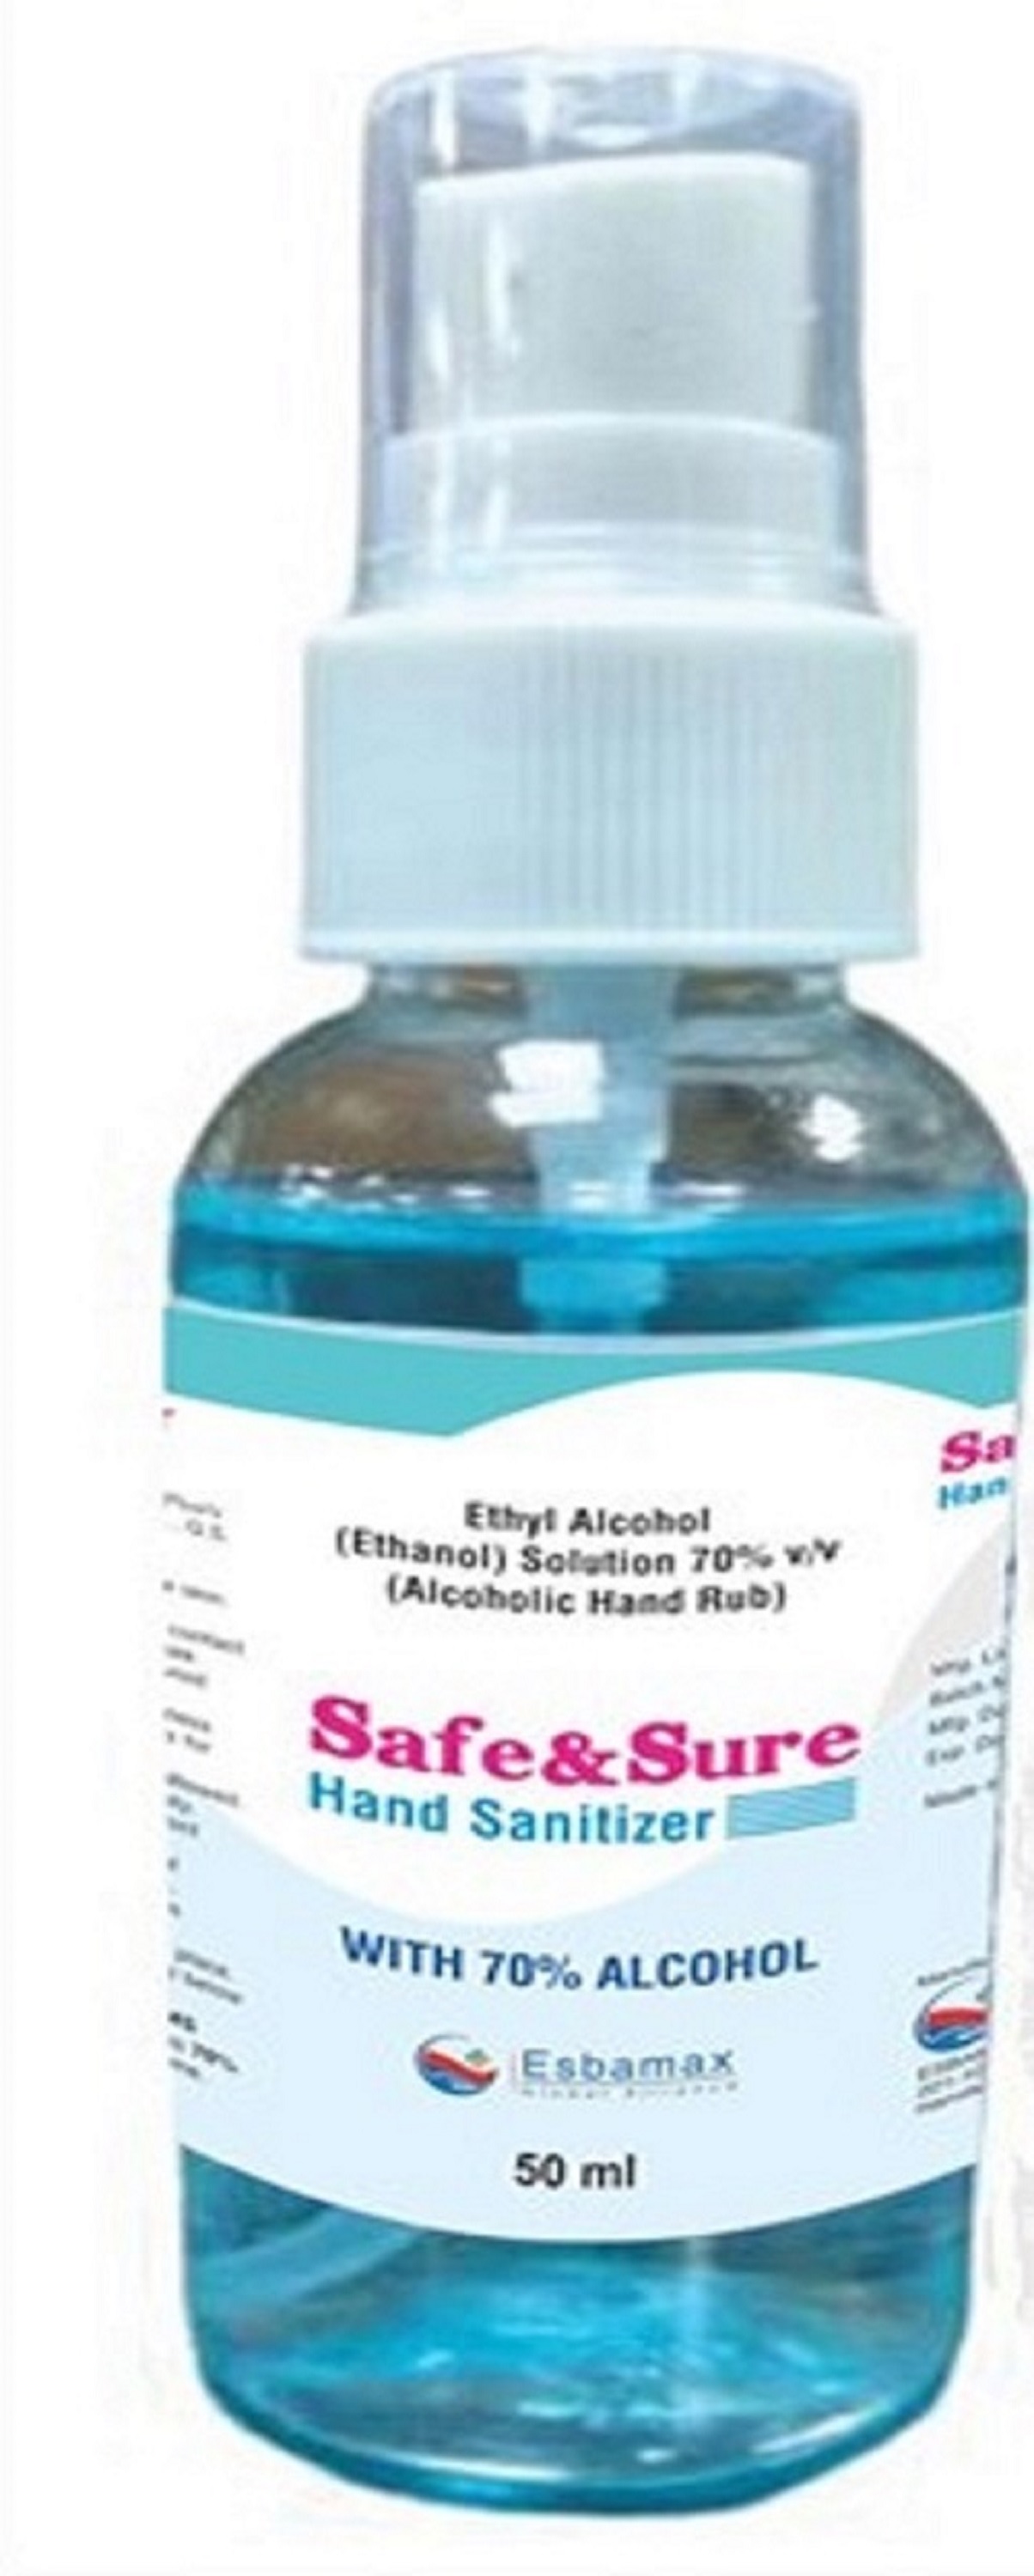 Safe & Sure Hand Sanitizer 50 ml.............."FOR PRIVATE LABEL ONLY"